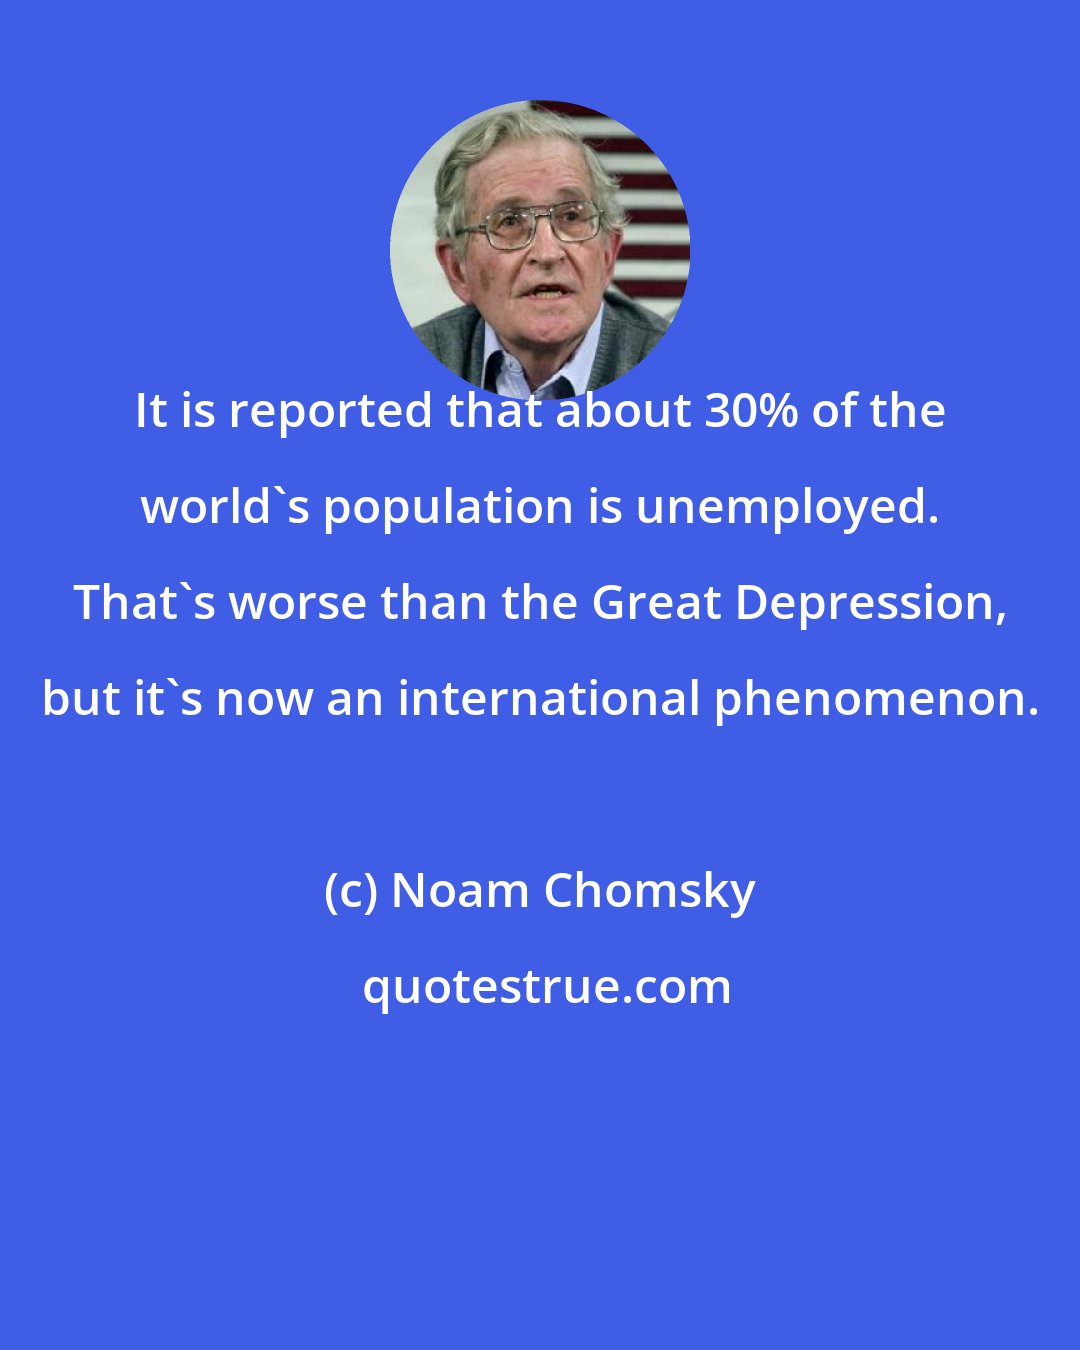 Noam Chomsky: It is reported that about 30% of the world's population is unemployed. That's worse than the Great Depression, but it's now an international phenomenon.